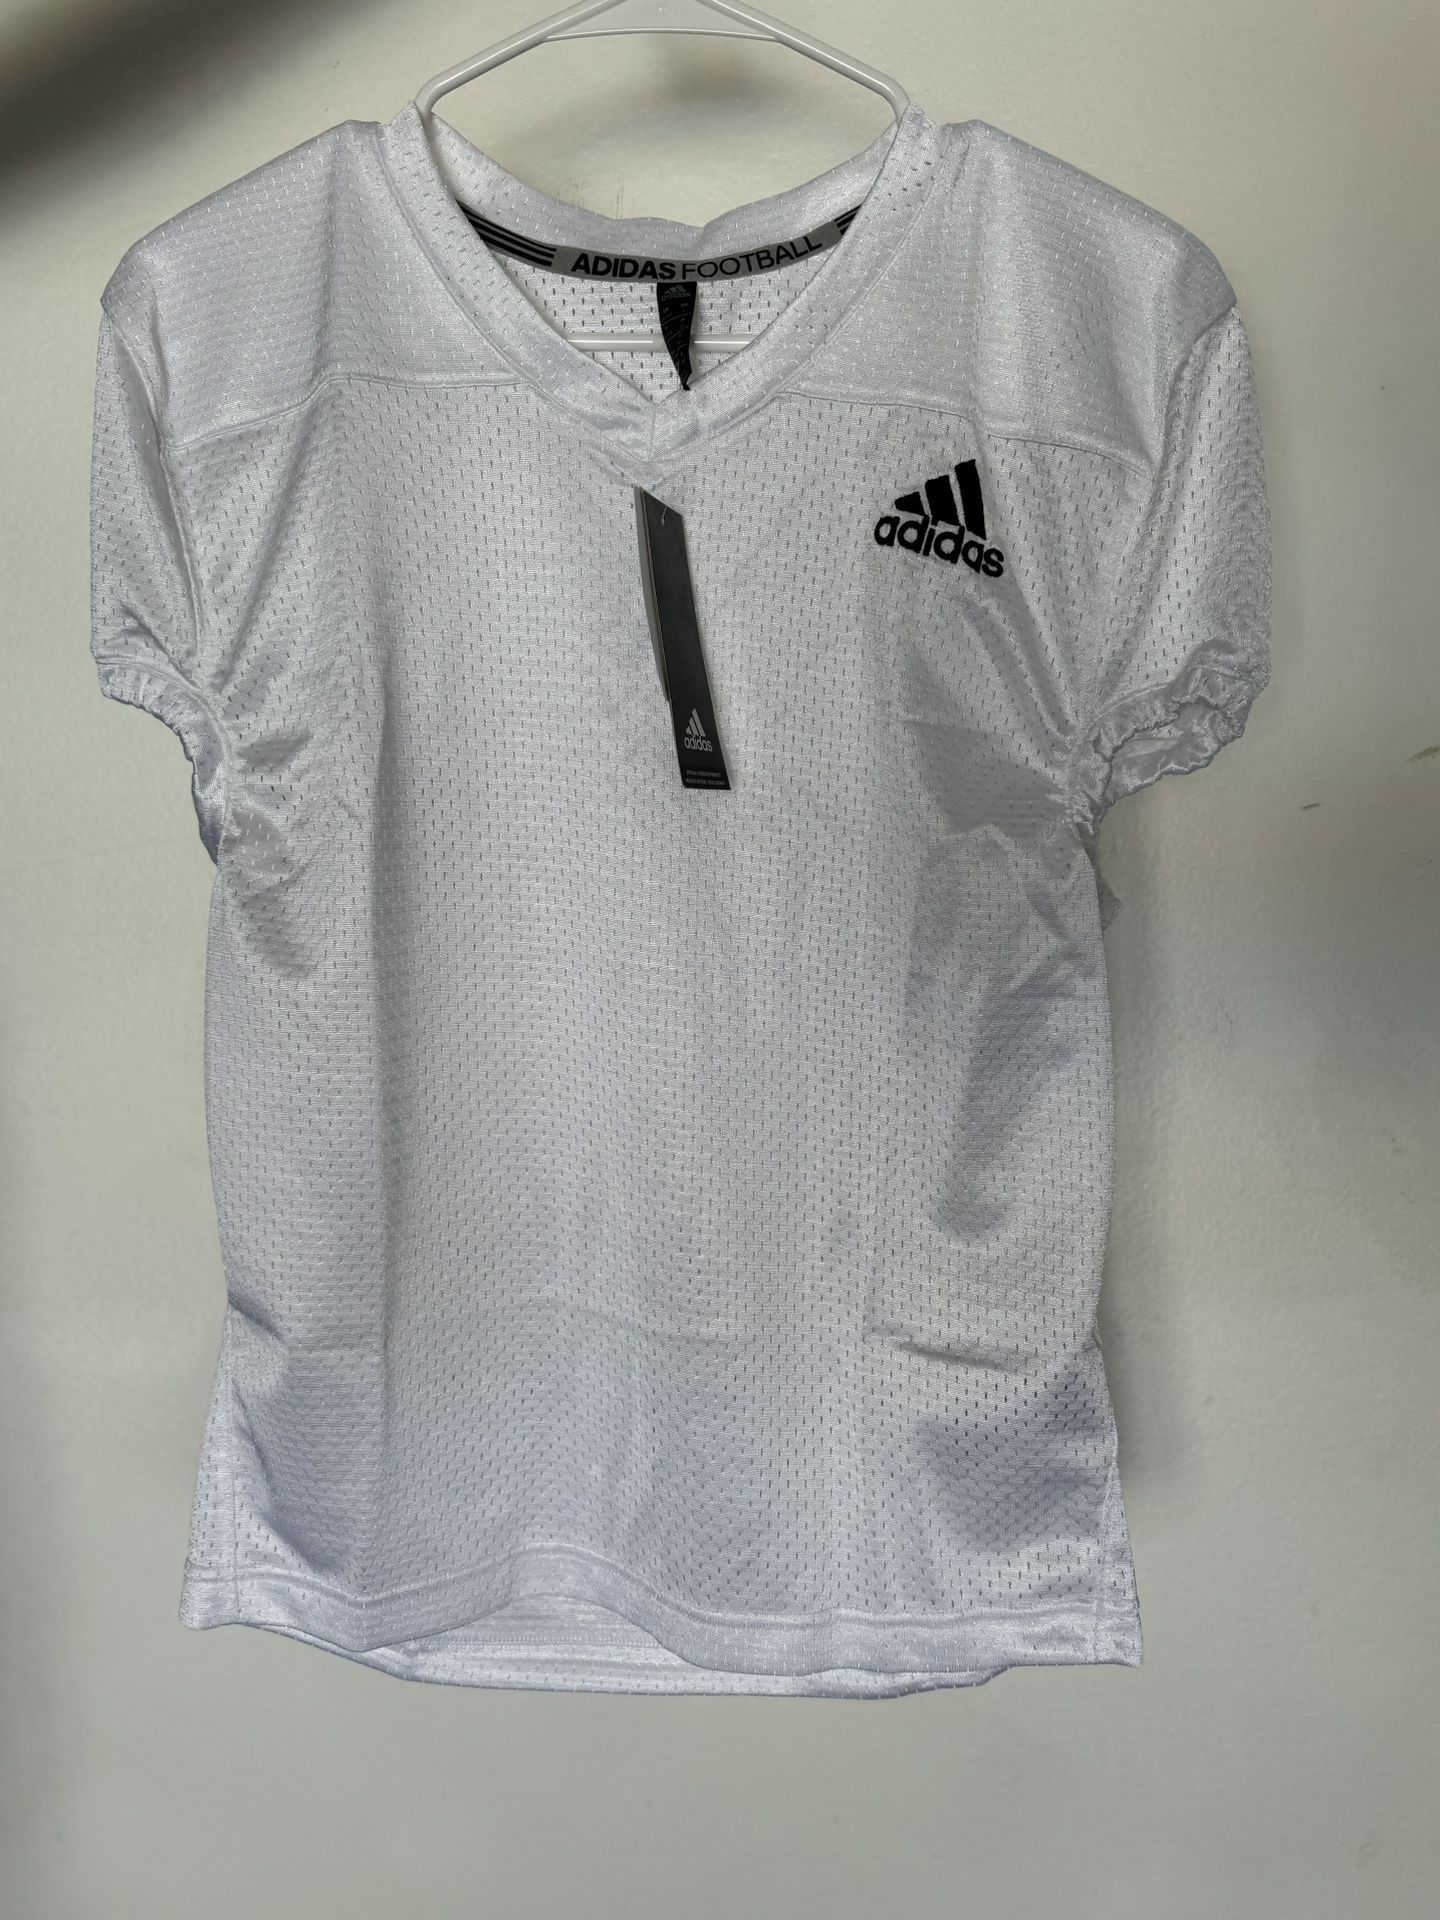 Adidas Football Practice Jersey Youth Large 